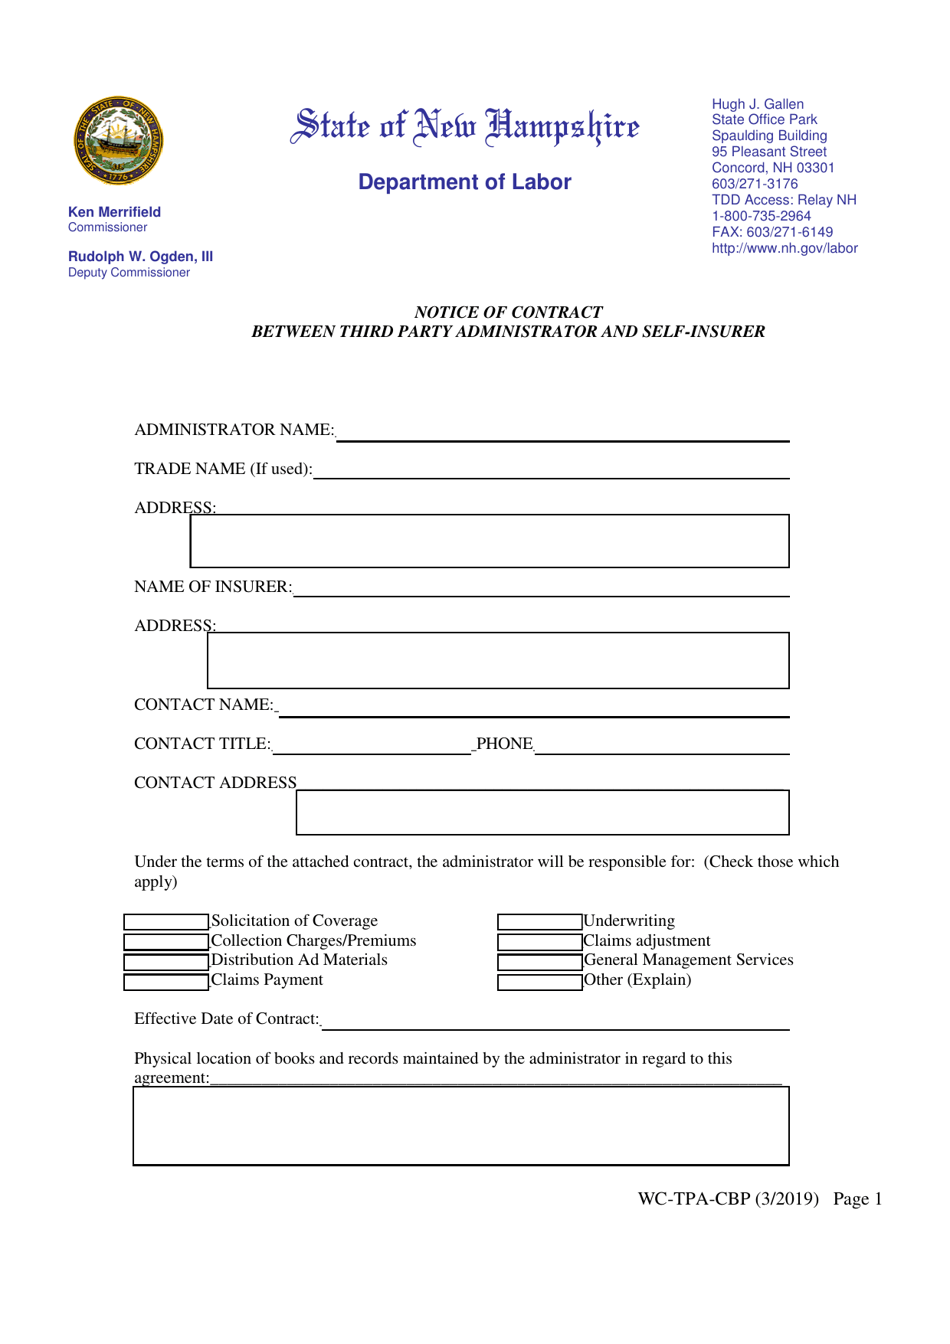 Form WC-TPA-CBP Notice of Contract Between Third Party Administrator and Self-insurer - New Hampshire, Page 1